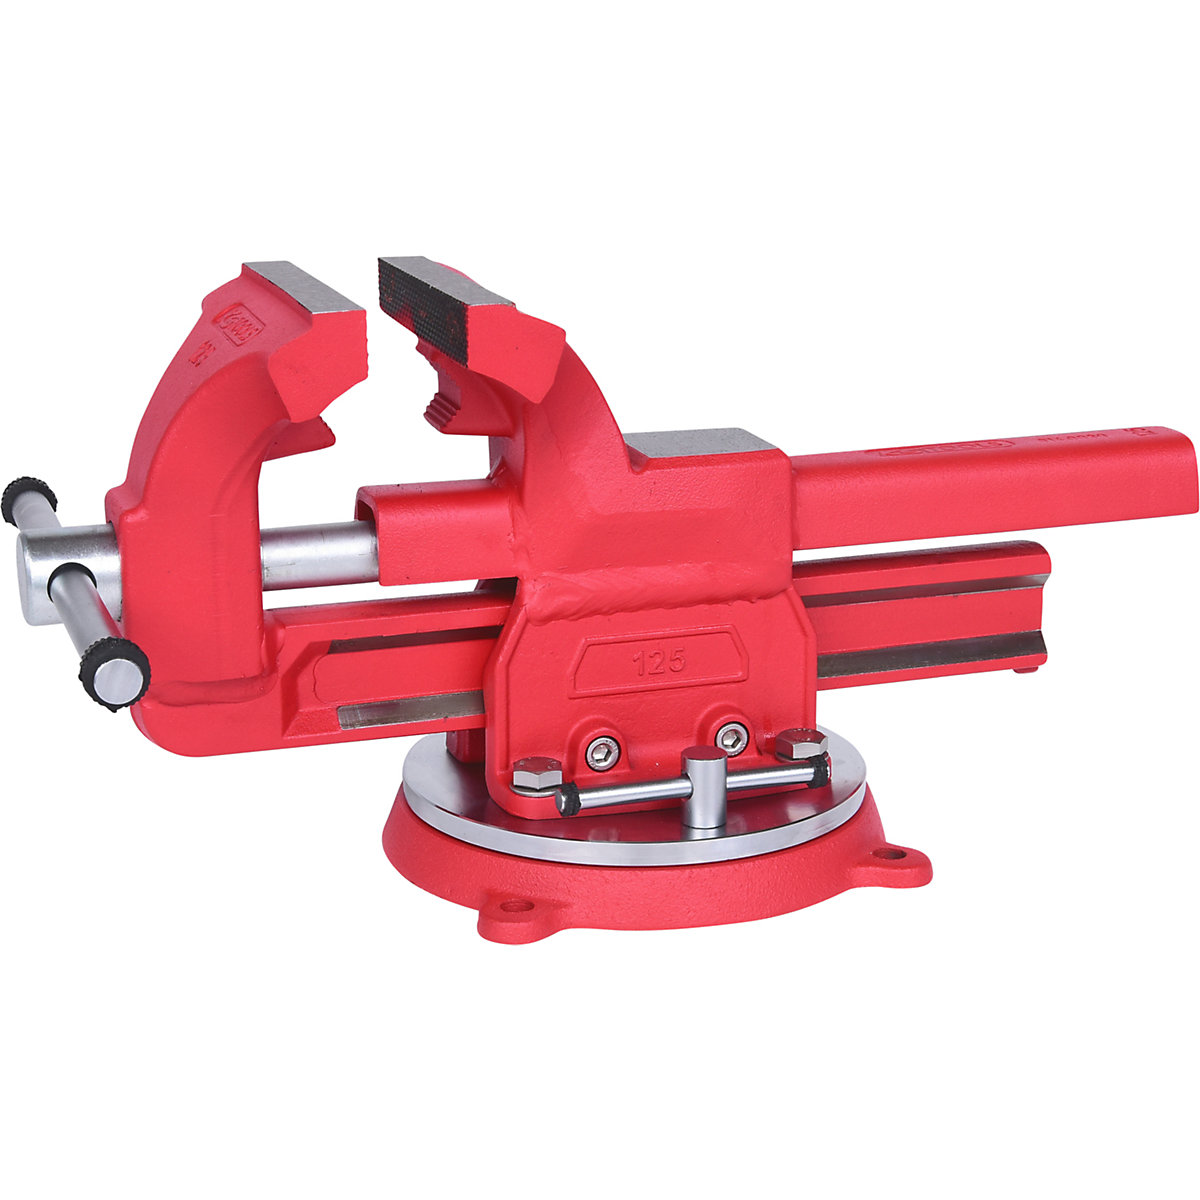 Parallel vice with round plate – KS Tools